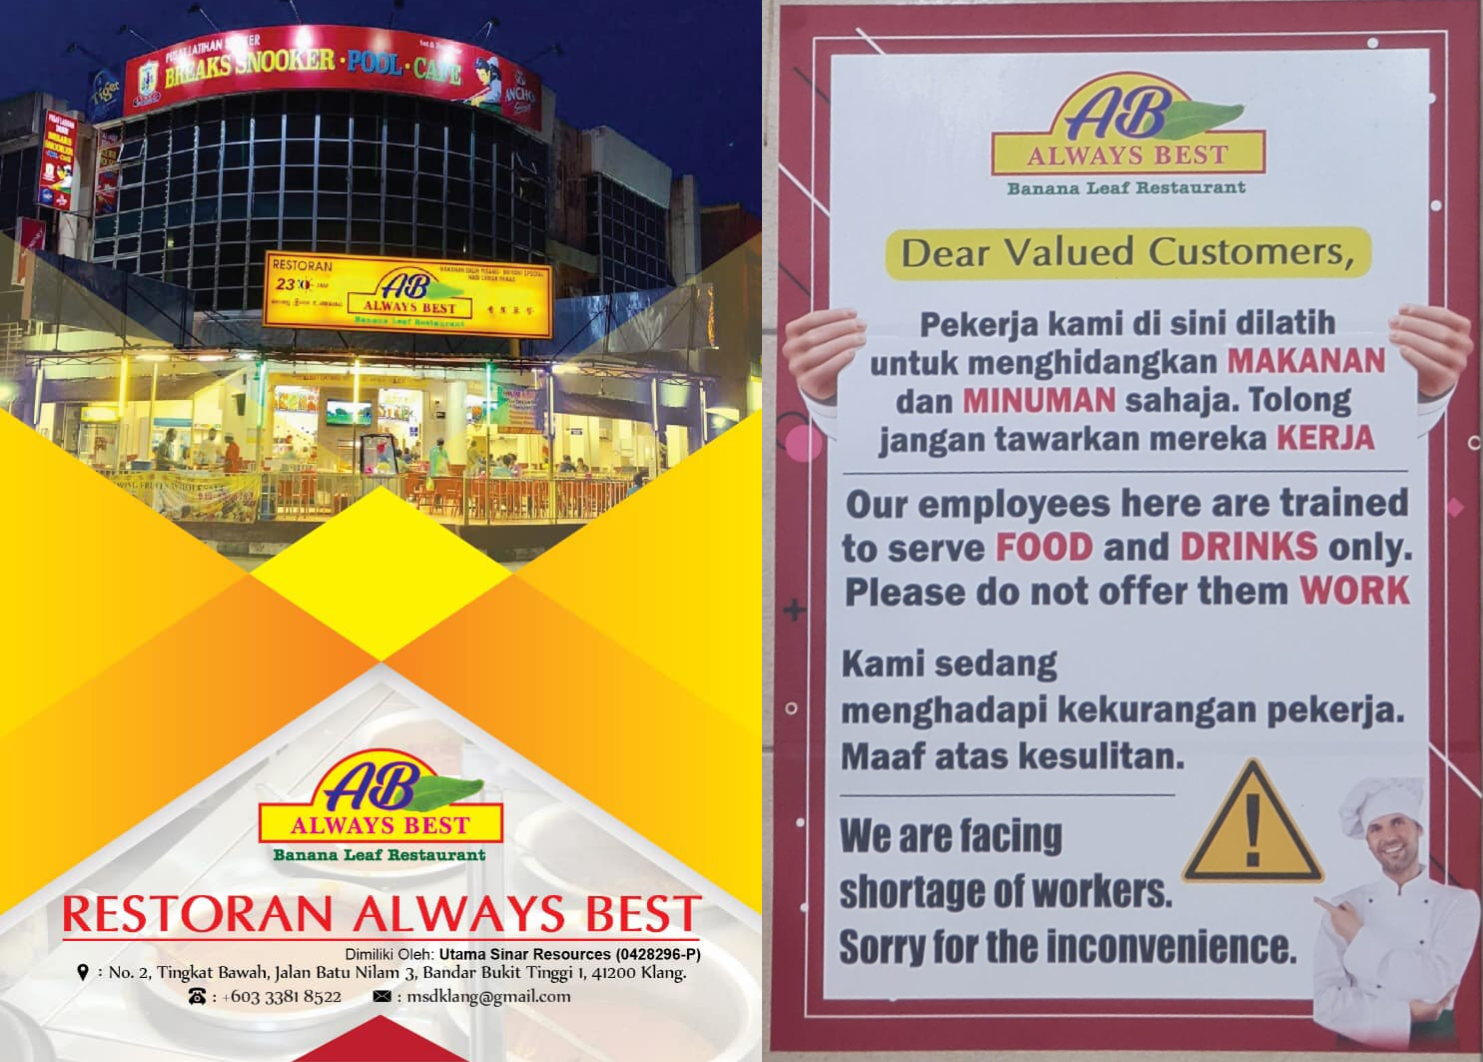 Mamak Owner Frustrated Over 'Customers' Offering Work To His Employees